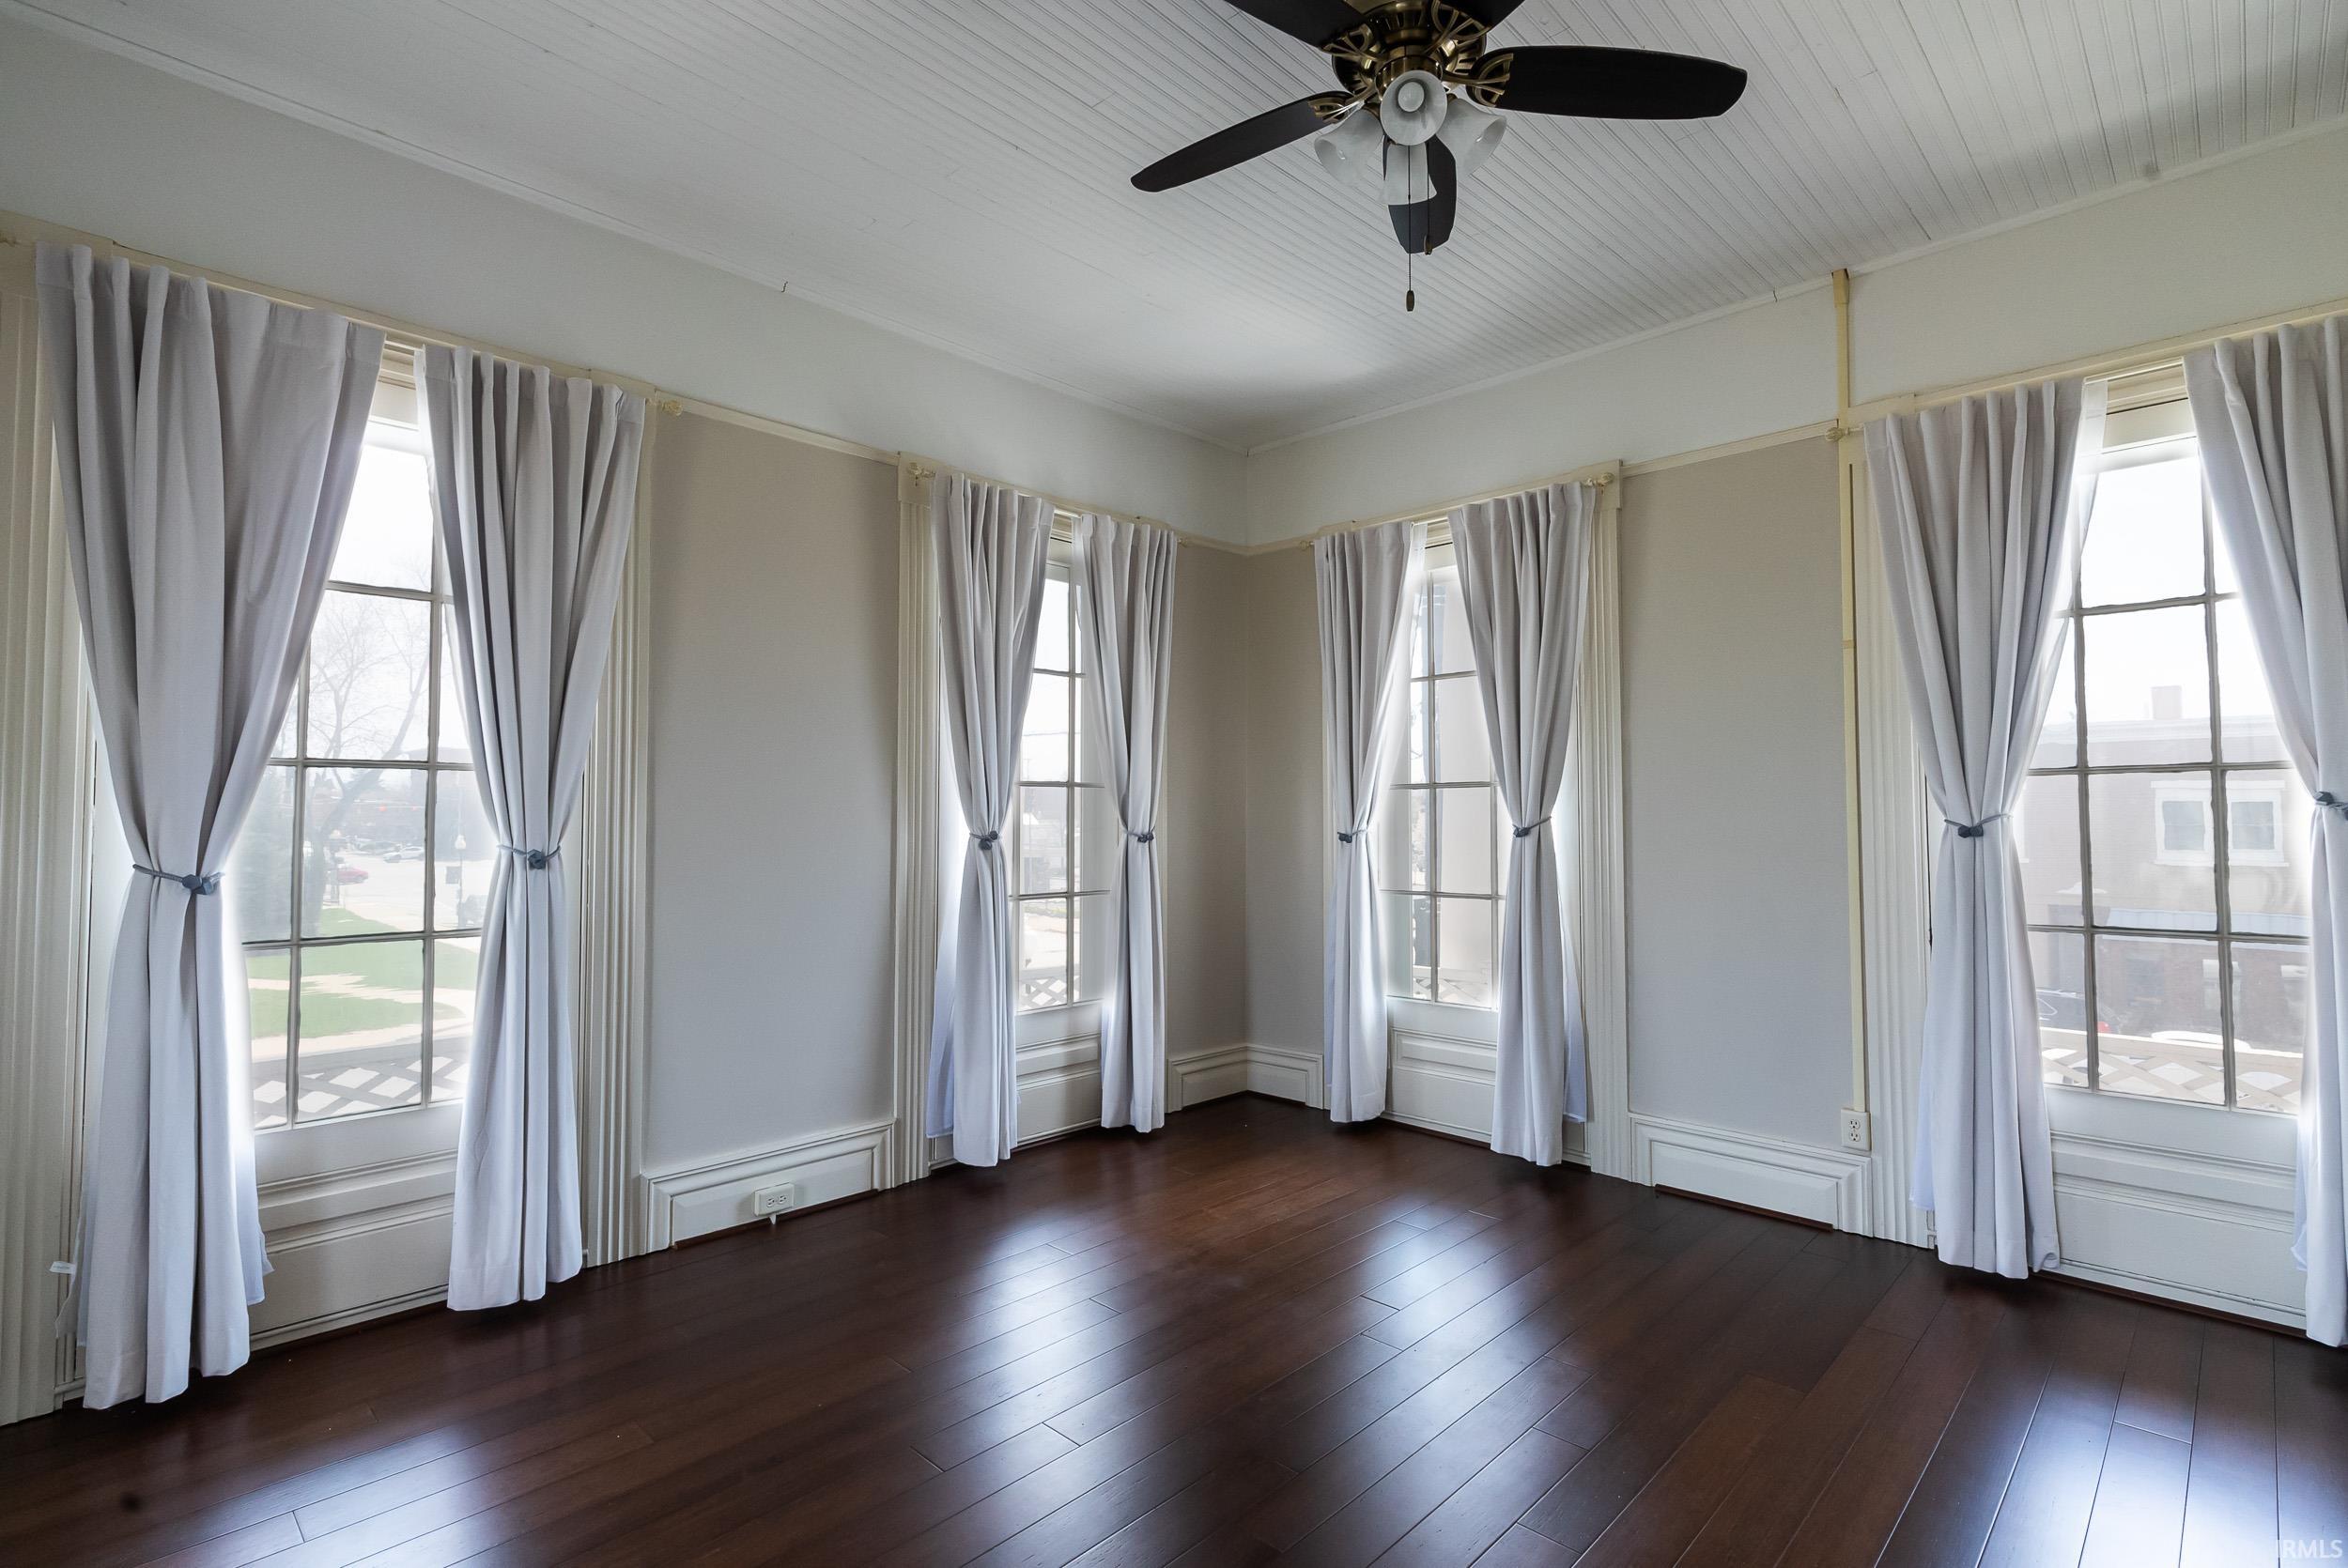 Has own mini split heating and cooling unit. Original curtains.  Piano is included in sale of the house.  This room has 6 doors that lead to the Balcony.  On this balcony the mayor used to address the town.  Size is 15 X 15